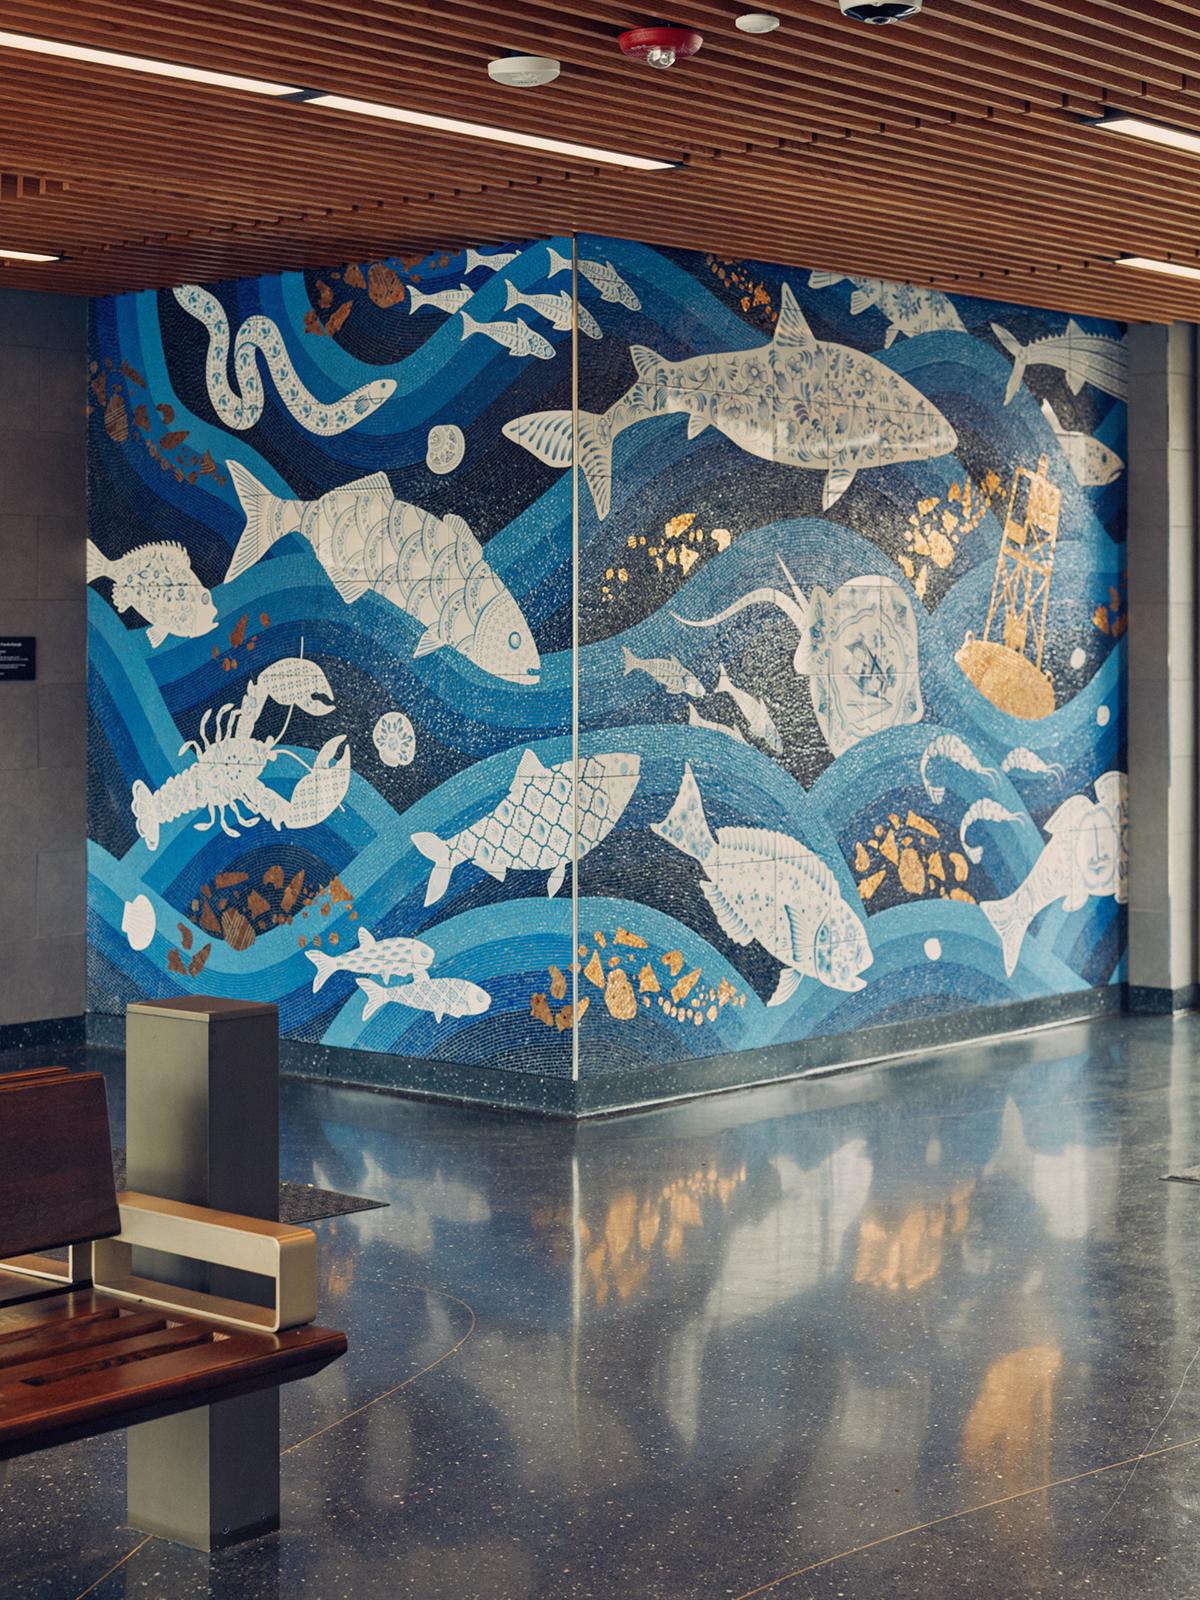 Photograph of an interior of a station with a mosaic on two adjoining walls featuring waves of blue color with sea life swimming throughout. Reflection is captured on the floor and a bench is in the foreground.